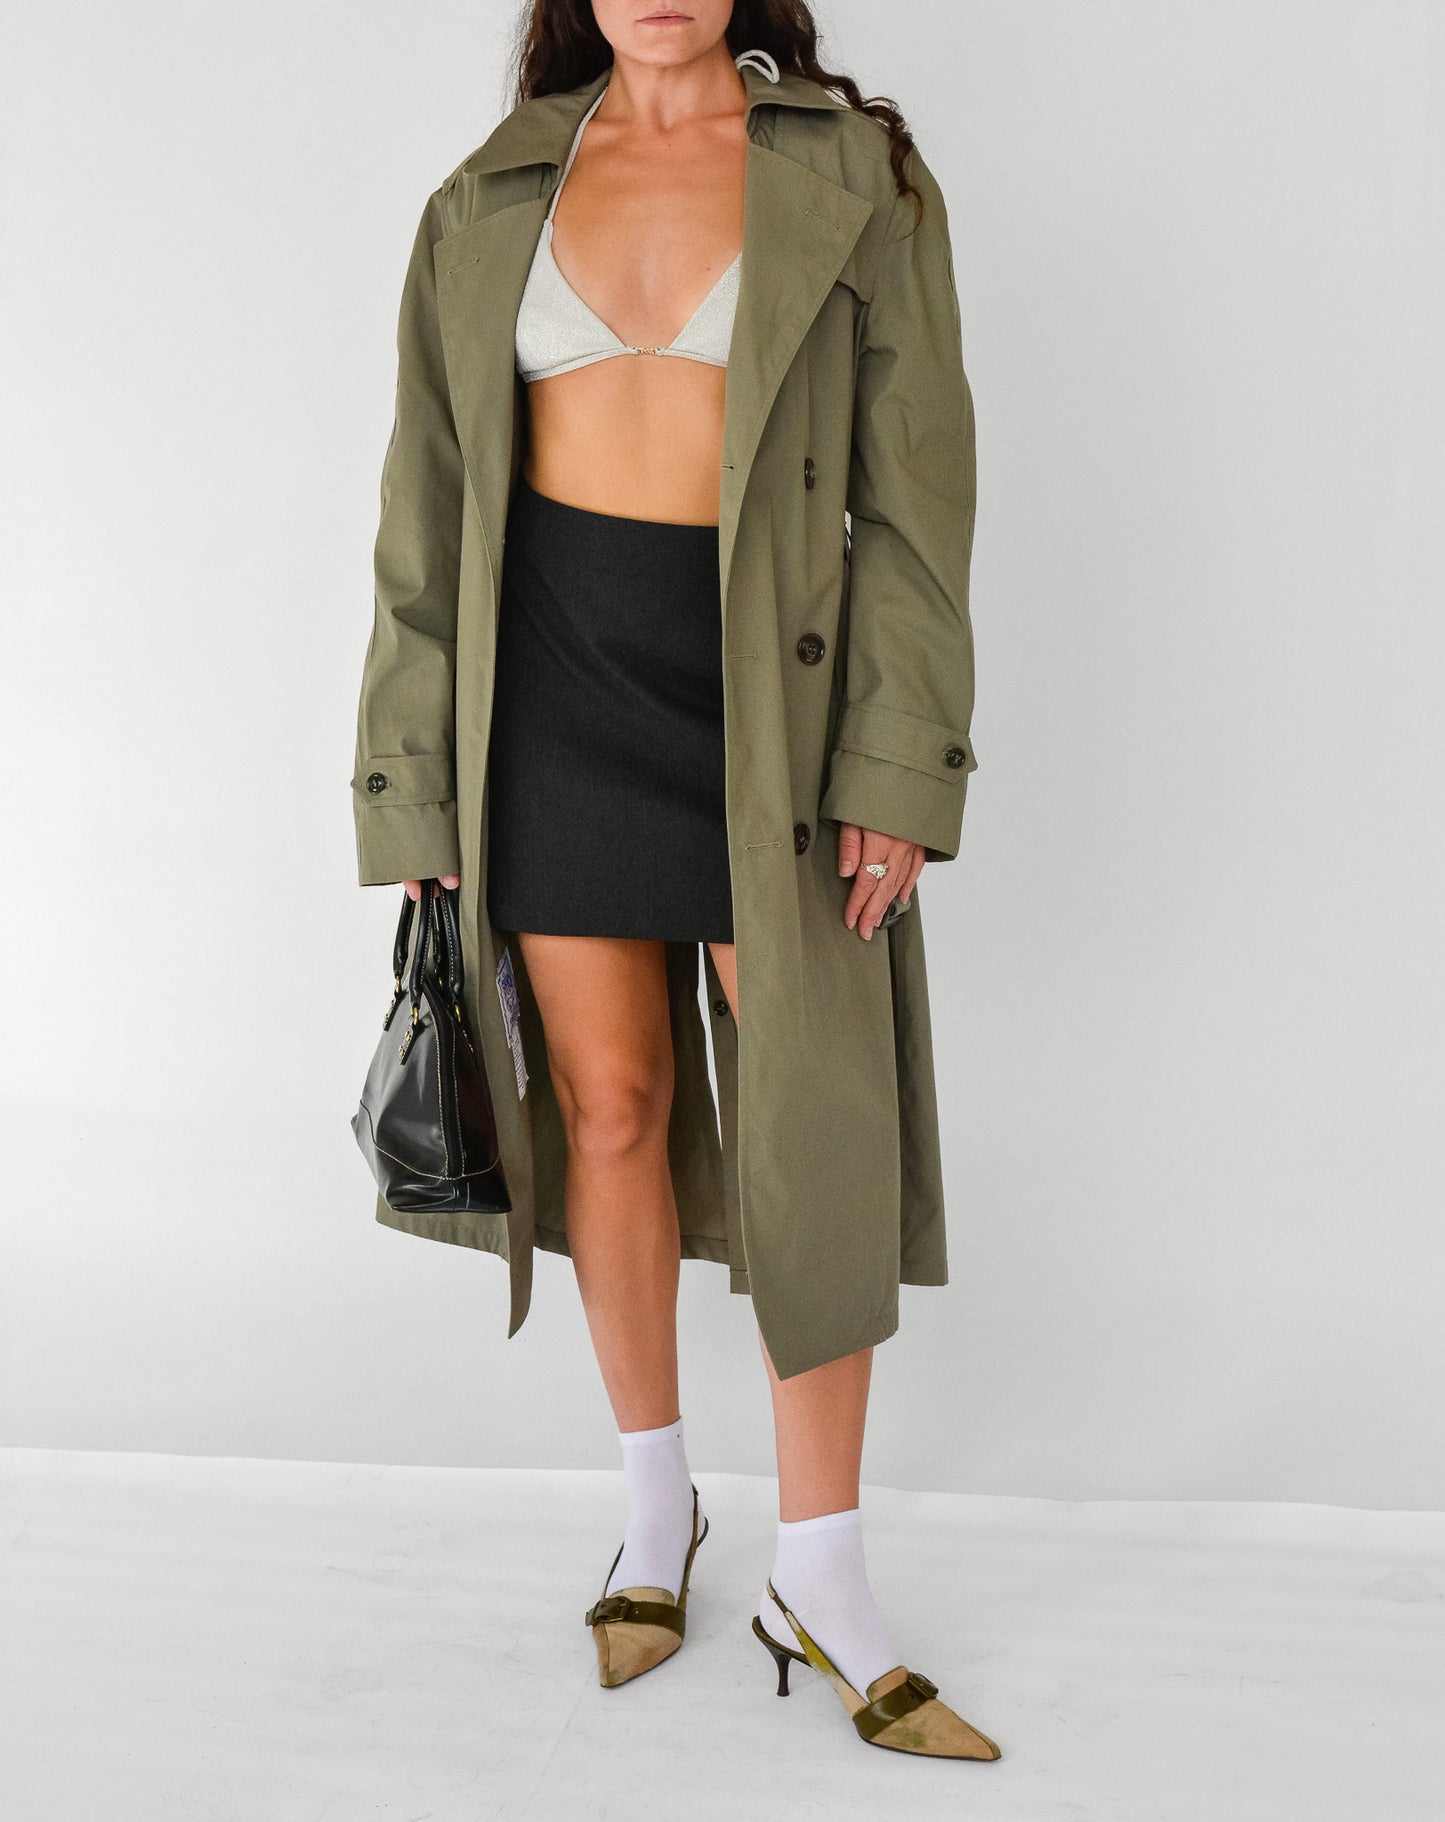 Sage Belted Trench Coat (M-L)